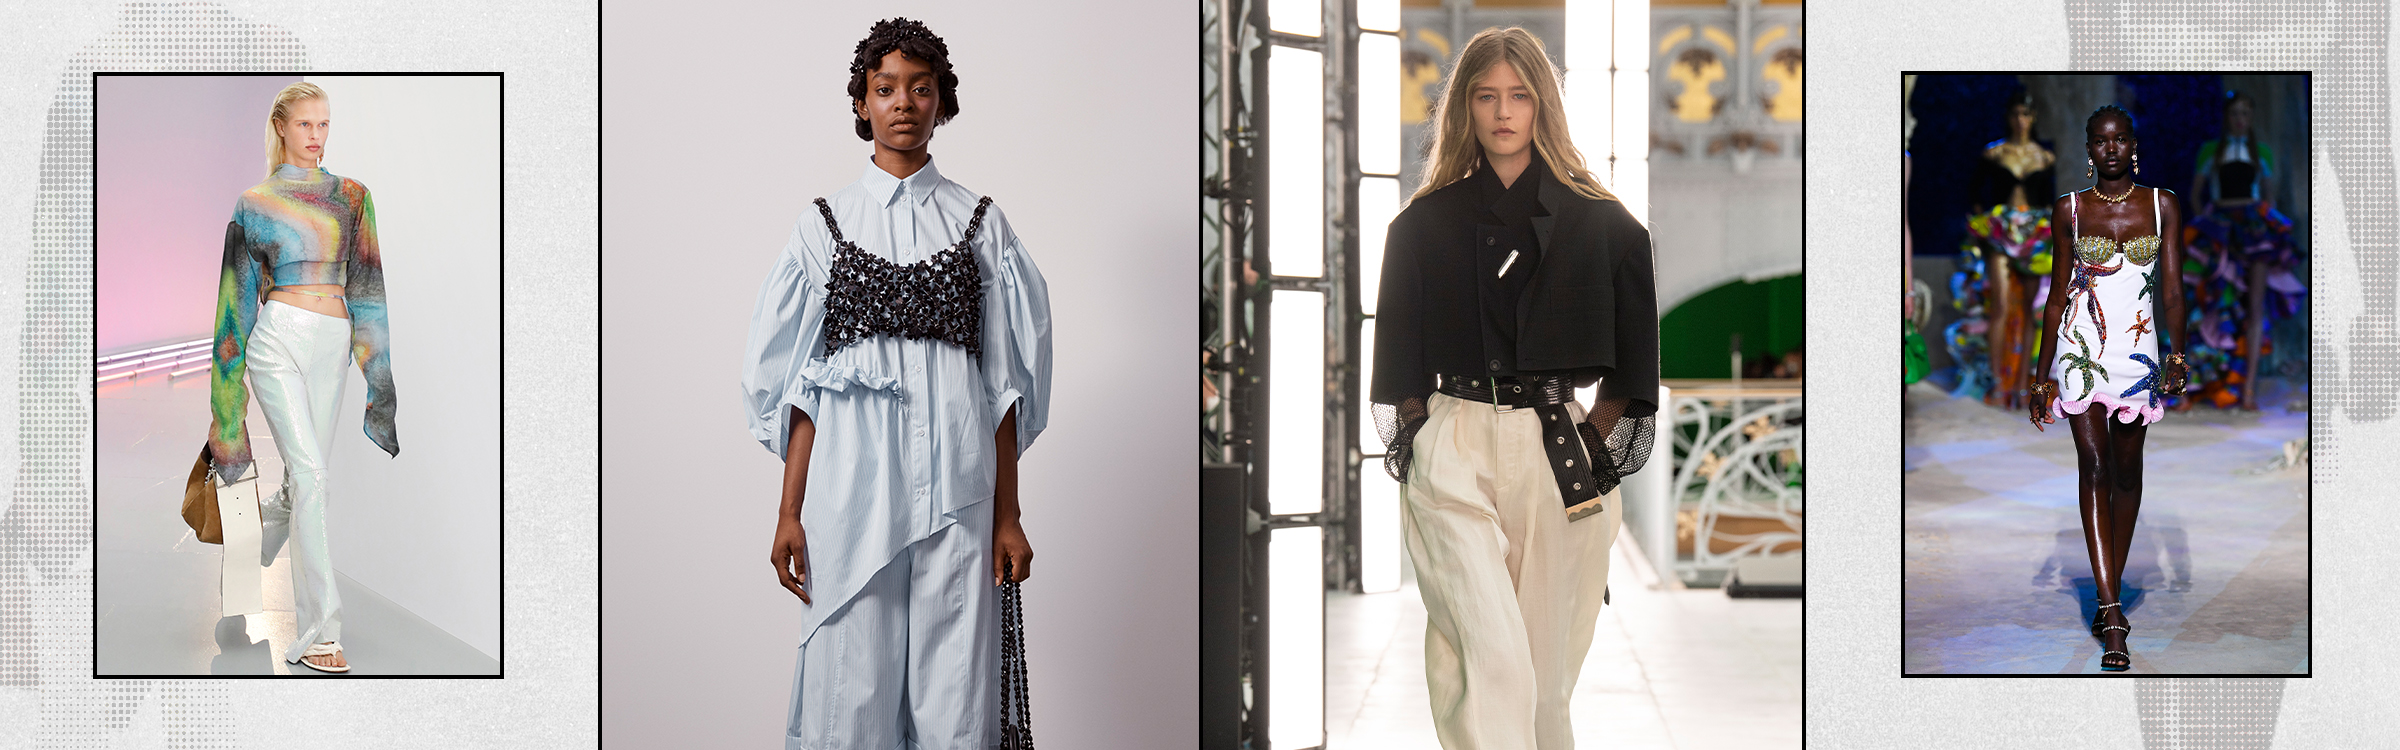 Spring/Summer 2021 Trends: The Most Important Fashion Looks You Need to Know